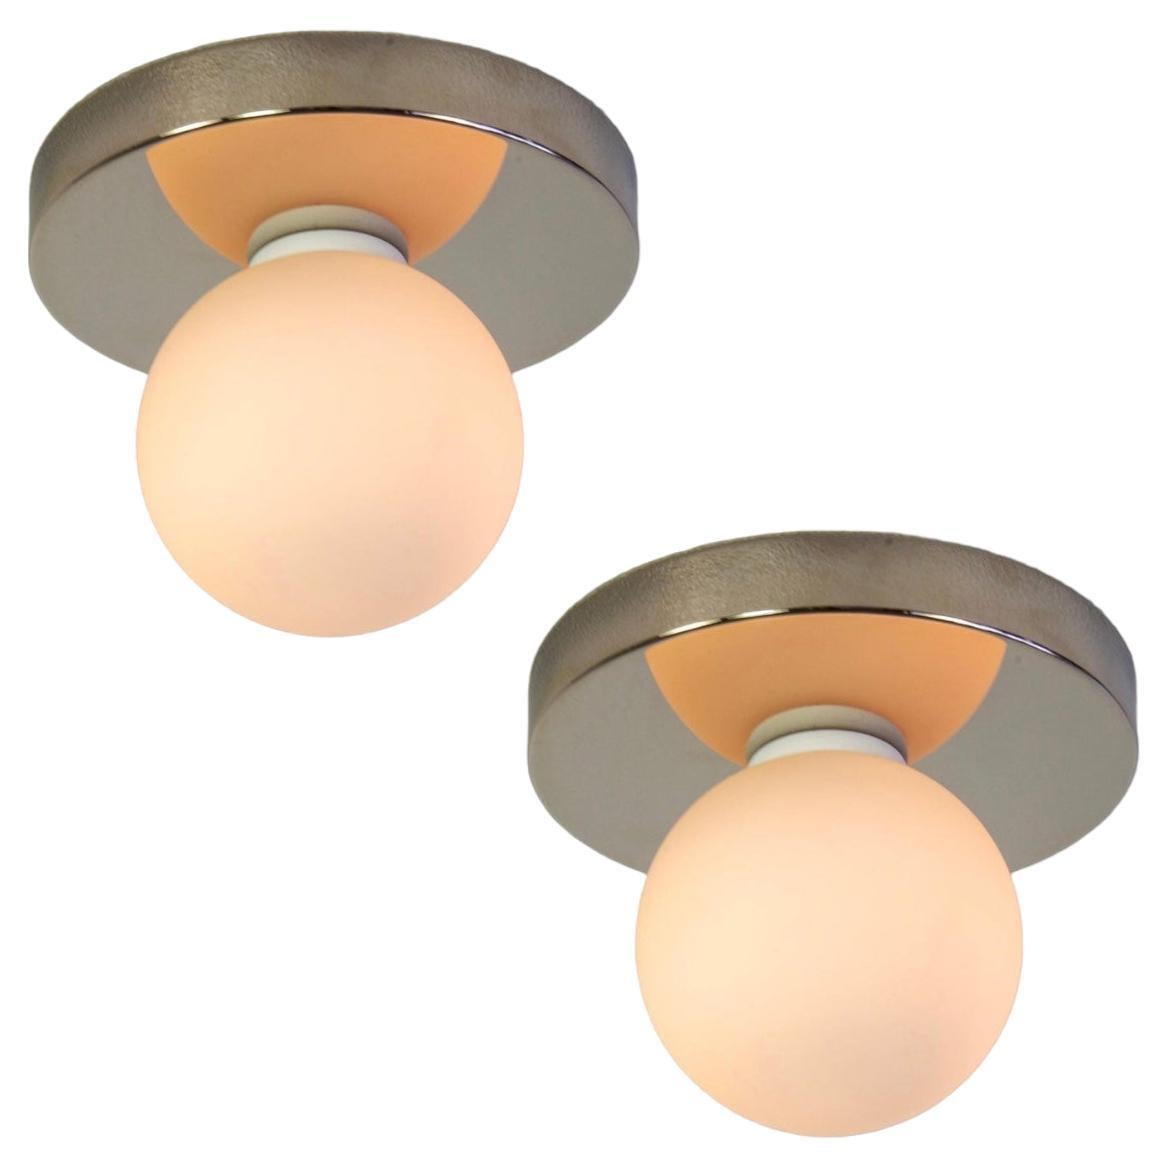 Pair of Globe Flush Mounts by Research.Lighting, Polished Nickel, Made to Order For Sale